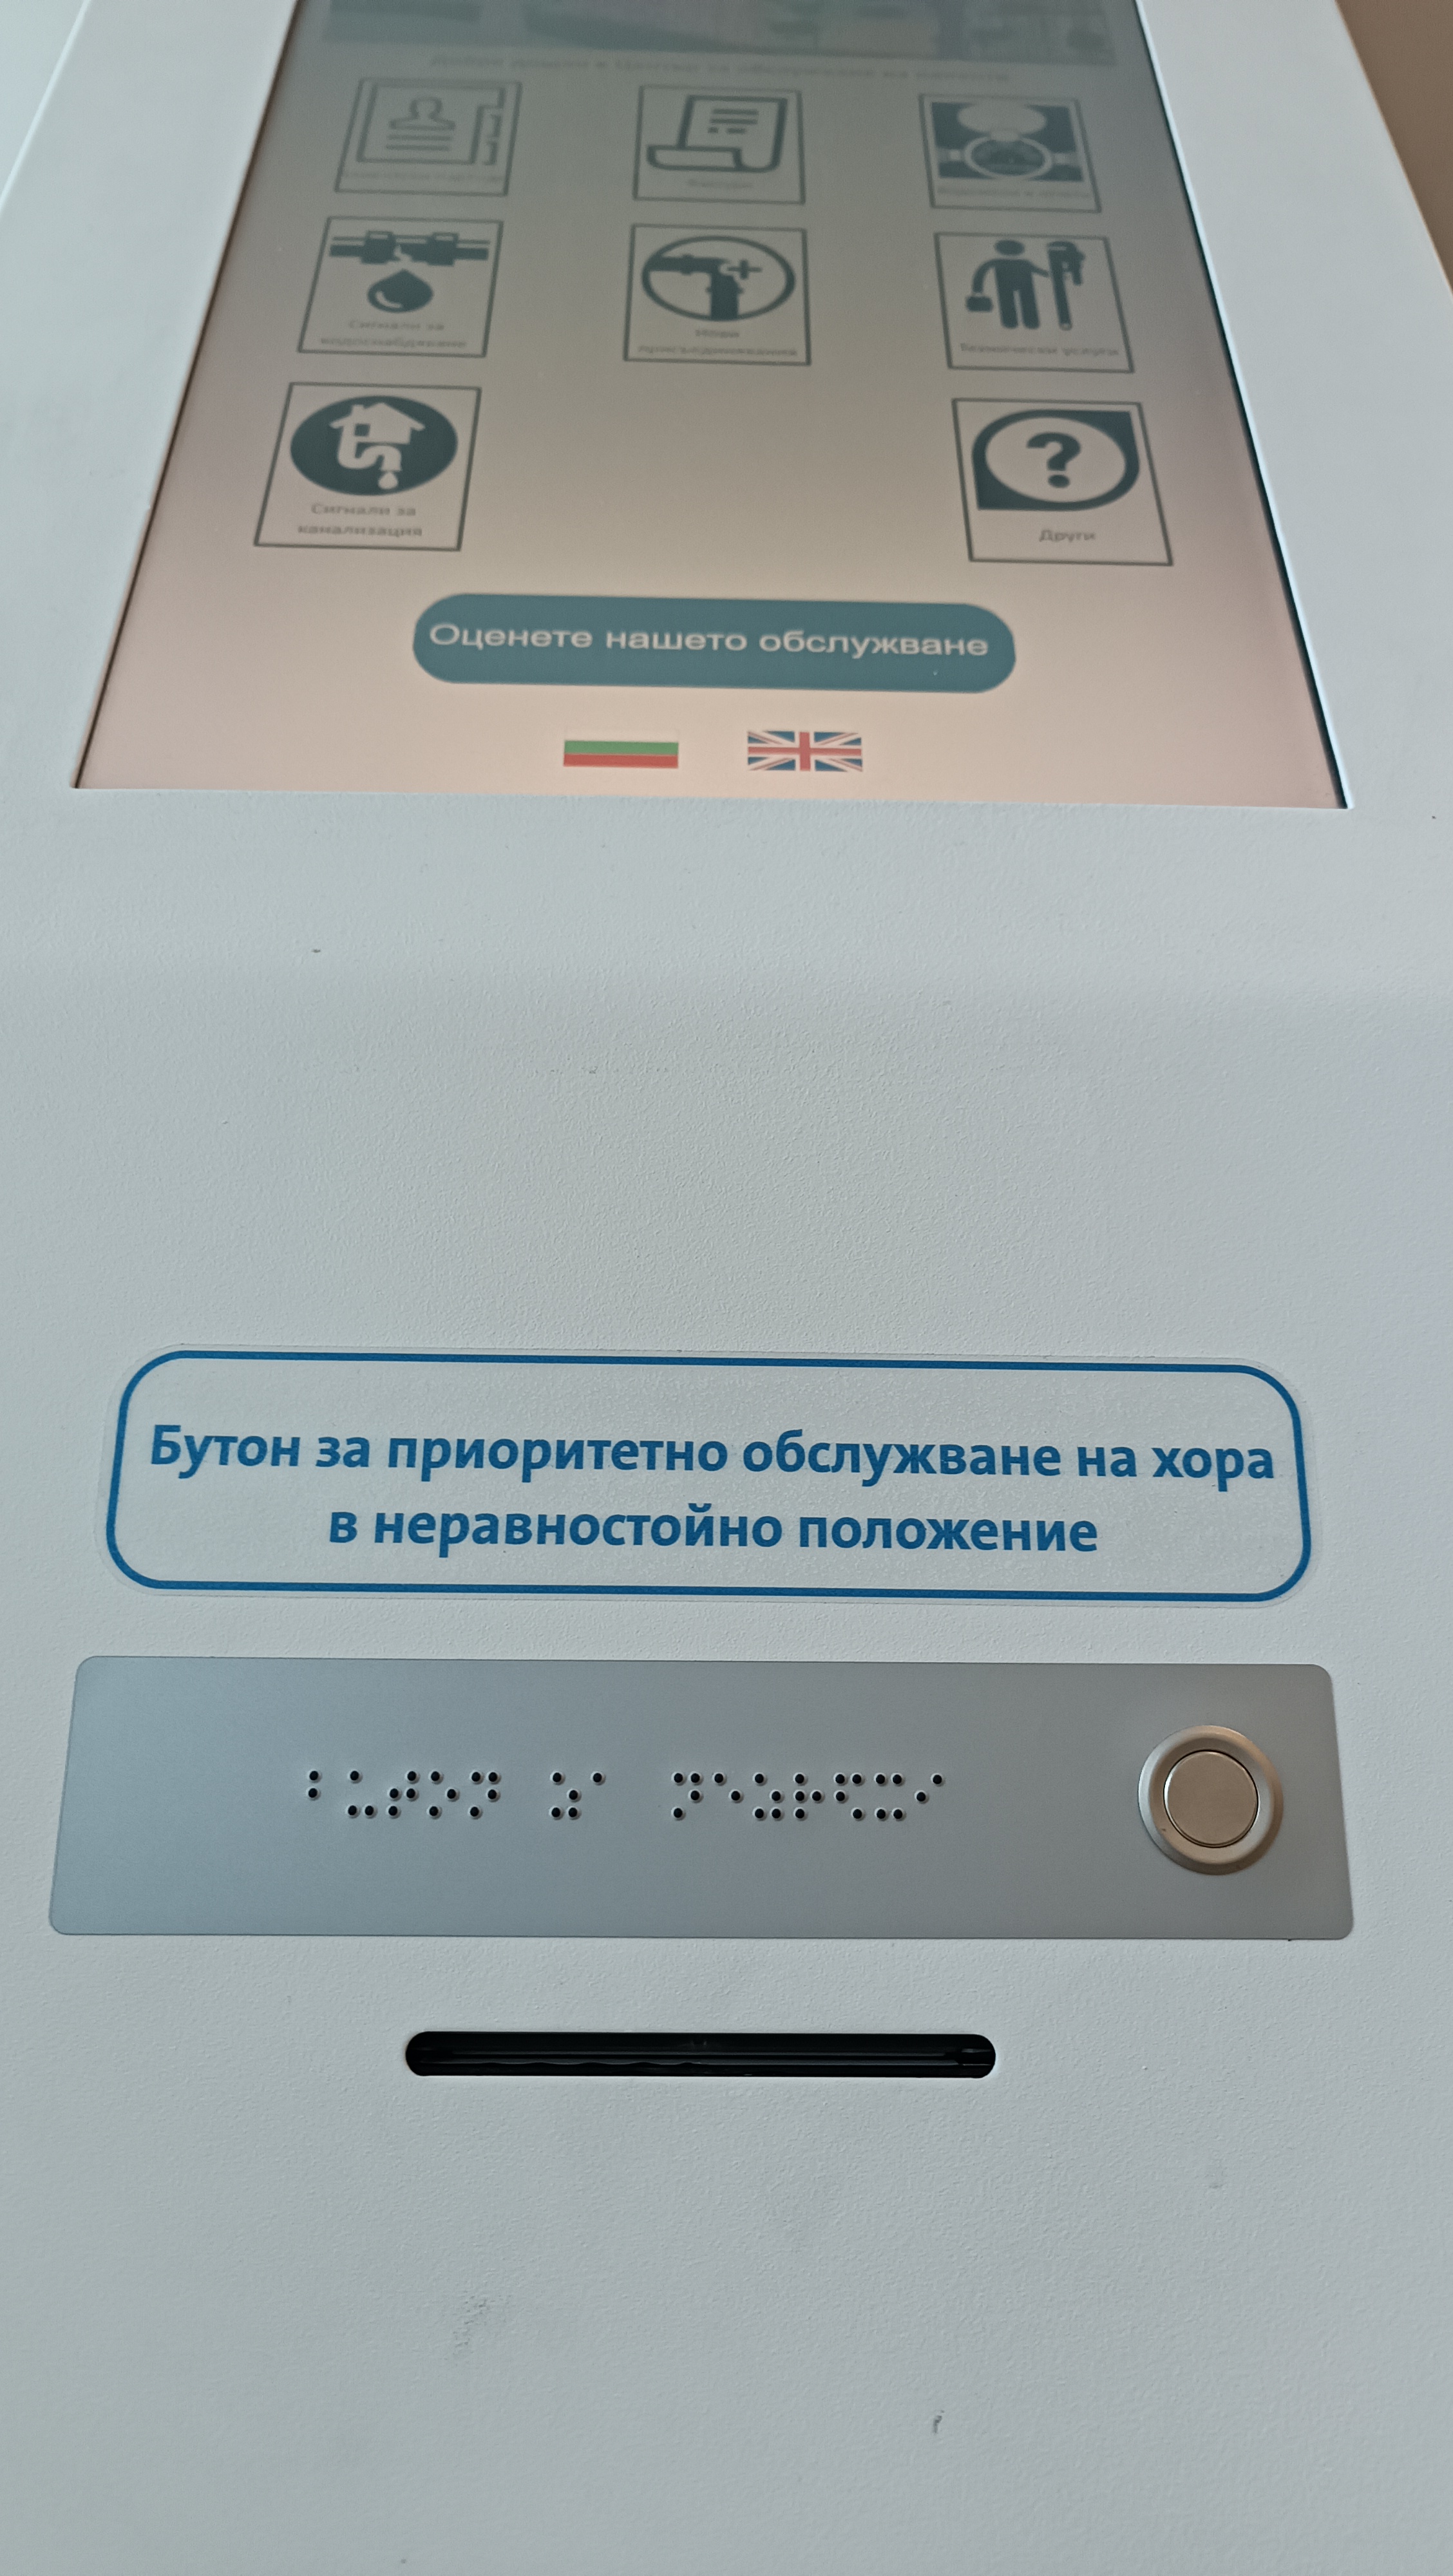 Sofiyska Voda launches a priority service system for disadvantaged people